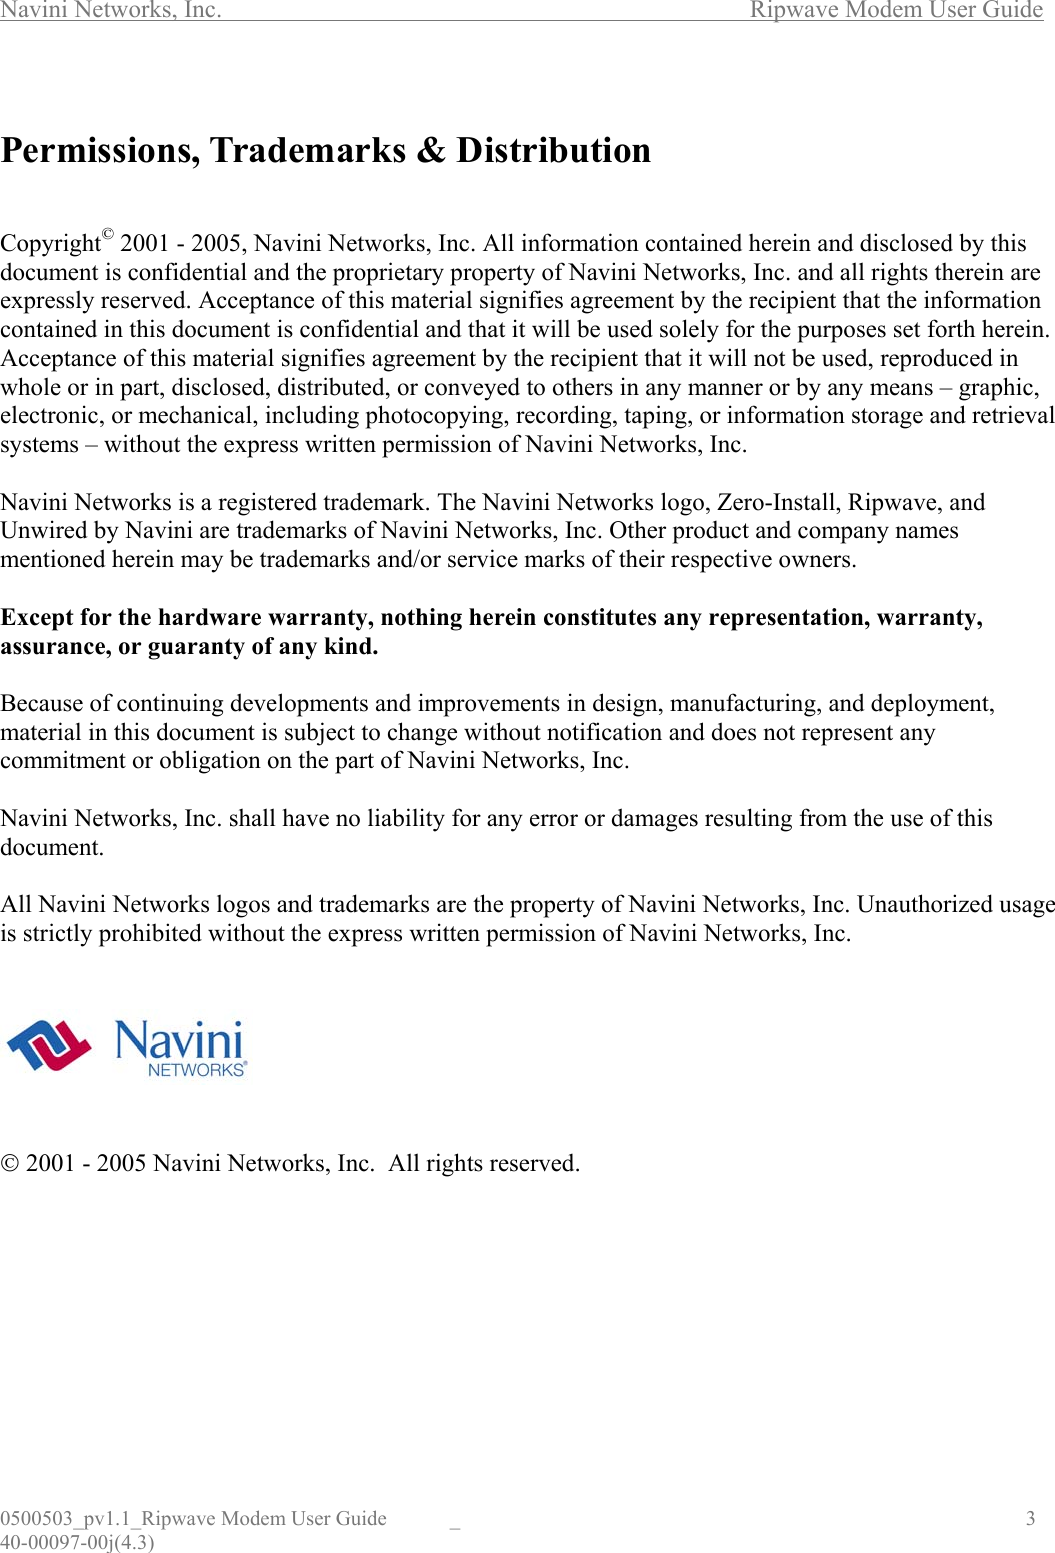 Navini Networks, Inc.        Ripwave Modem User Guide 0500503_pv1.1_Ripwave Modem User Guide  _                                    3 40-00097-00j(4.3)  Permissions, Trademarks &amp; Distribution   Copyright© 2001 - 2005, Navini Networks, Inc. All information contained herein and disclosed by this document is confidential and the proprietary property of Navini Networks, Inc. and all rights therein are expressly reserved. Acceptance of this material signifies agreement by the recipient that the information contained in this document is confidential and that it will be used solely for the purposes set forth herein. Acceptance of this material signifies agreement by the recipient that it will not be used, reproduced in whole or in part, disclosed, distributed, or conveyed to others in any manner or by any means – graphic, electronic, or mechanical, including photocopying, recording, taping, or information storage and retrieval systems – without the express written permission of Navini Networks, Inc.  Navini Networks is a registered trademark. The Navini Networks logo, Zero-Install, Ripwave, and Unwired by Navini are trademarks of Navini Networks, Inc. Other product and company names mentioned herein may be trademarks and/or service marks of their respective owners.  Except for the hardware warranty, nothing herein constitutes any representation, warranty, assurance, or guaranty of any kind.  Because of continuing developments and improvements in design, manufacturing, and deployment, material in this document is subject to change without notification and does not represent any commitment or obligation on the part of Navini Networks, Inc.  Navini Networks, Inc. shall have no liability for any error or damages resulting from the use of this document.  All Navini Networks logos and trademarks are the property of Navini Networks, Inc. Unauthorized usage is strictly prohibited without the express written permission of Navini Networks, Inc.         2001 - 2005 Navini Networks, Inc.  All rights reserved.       